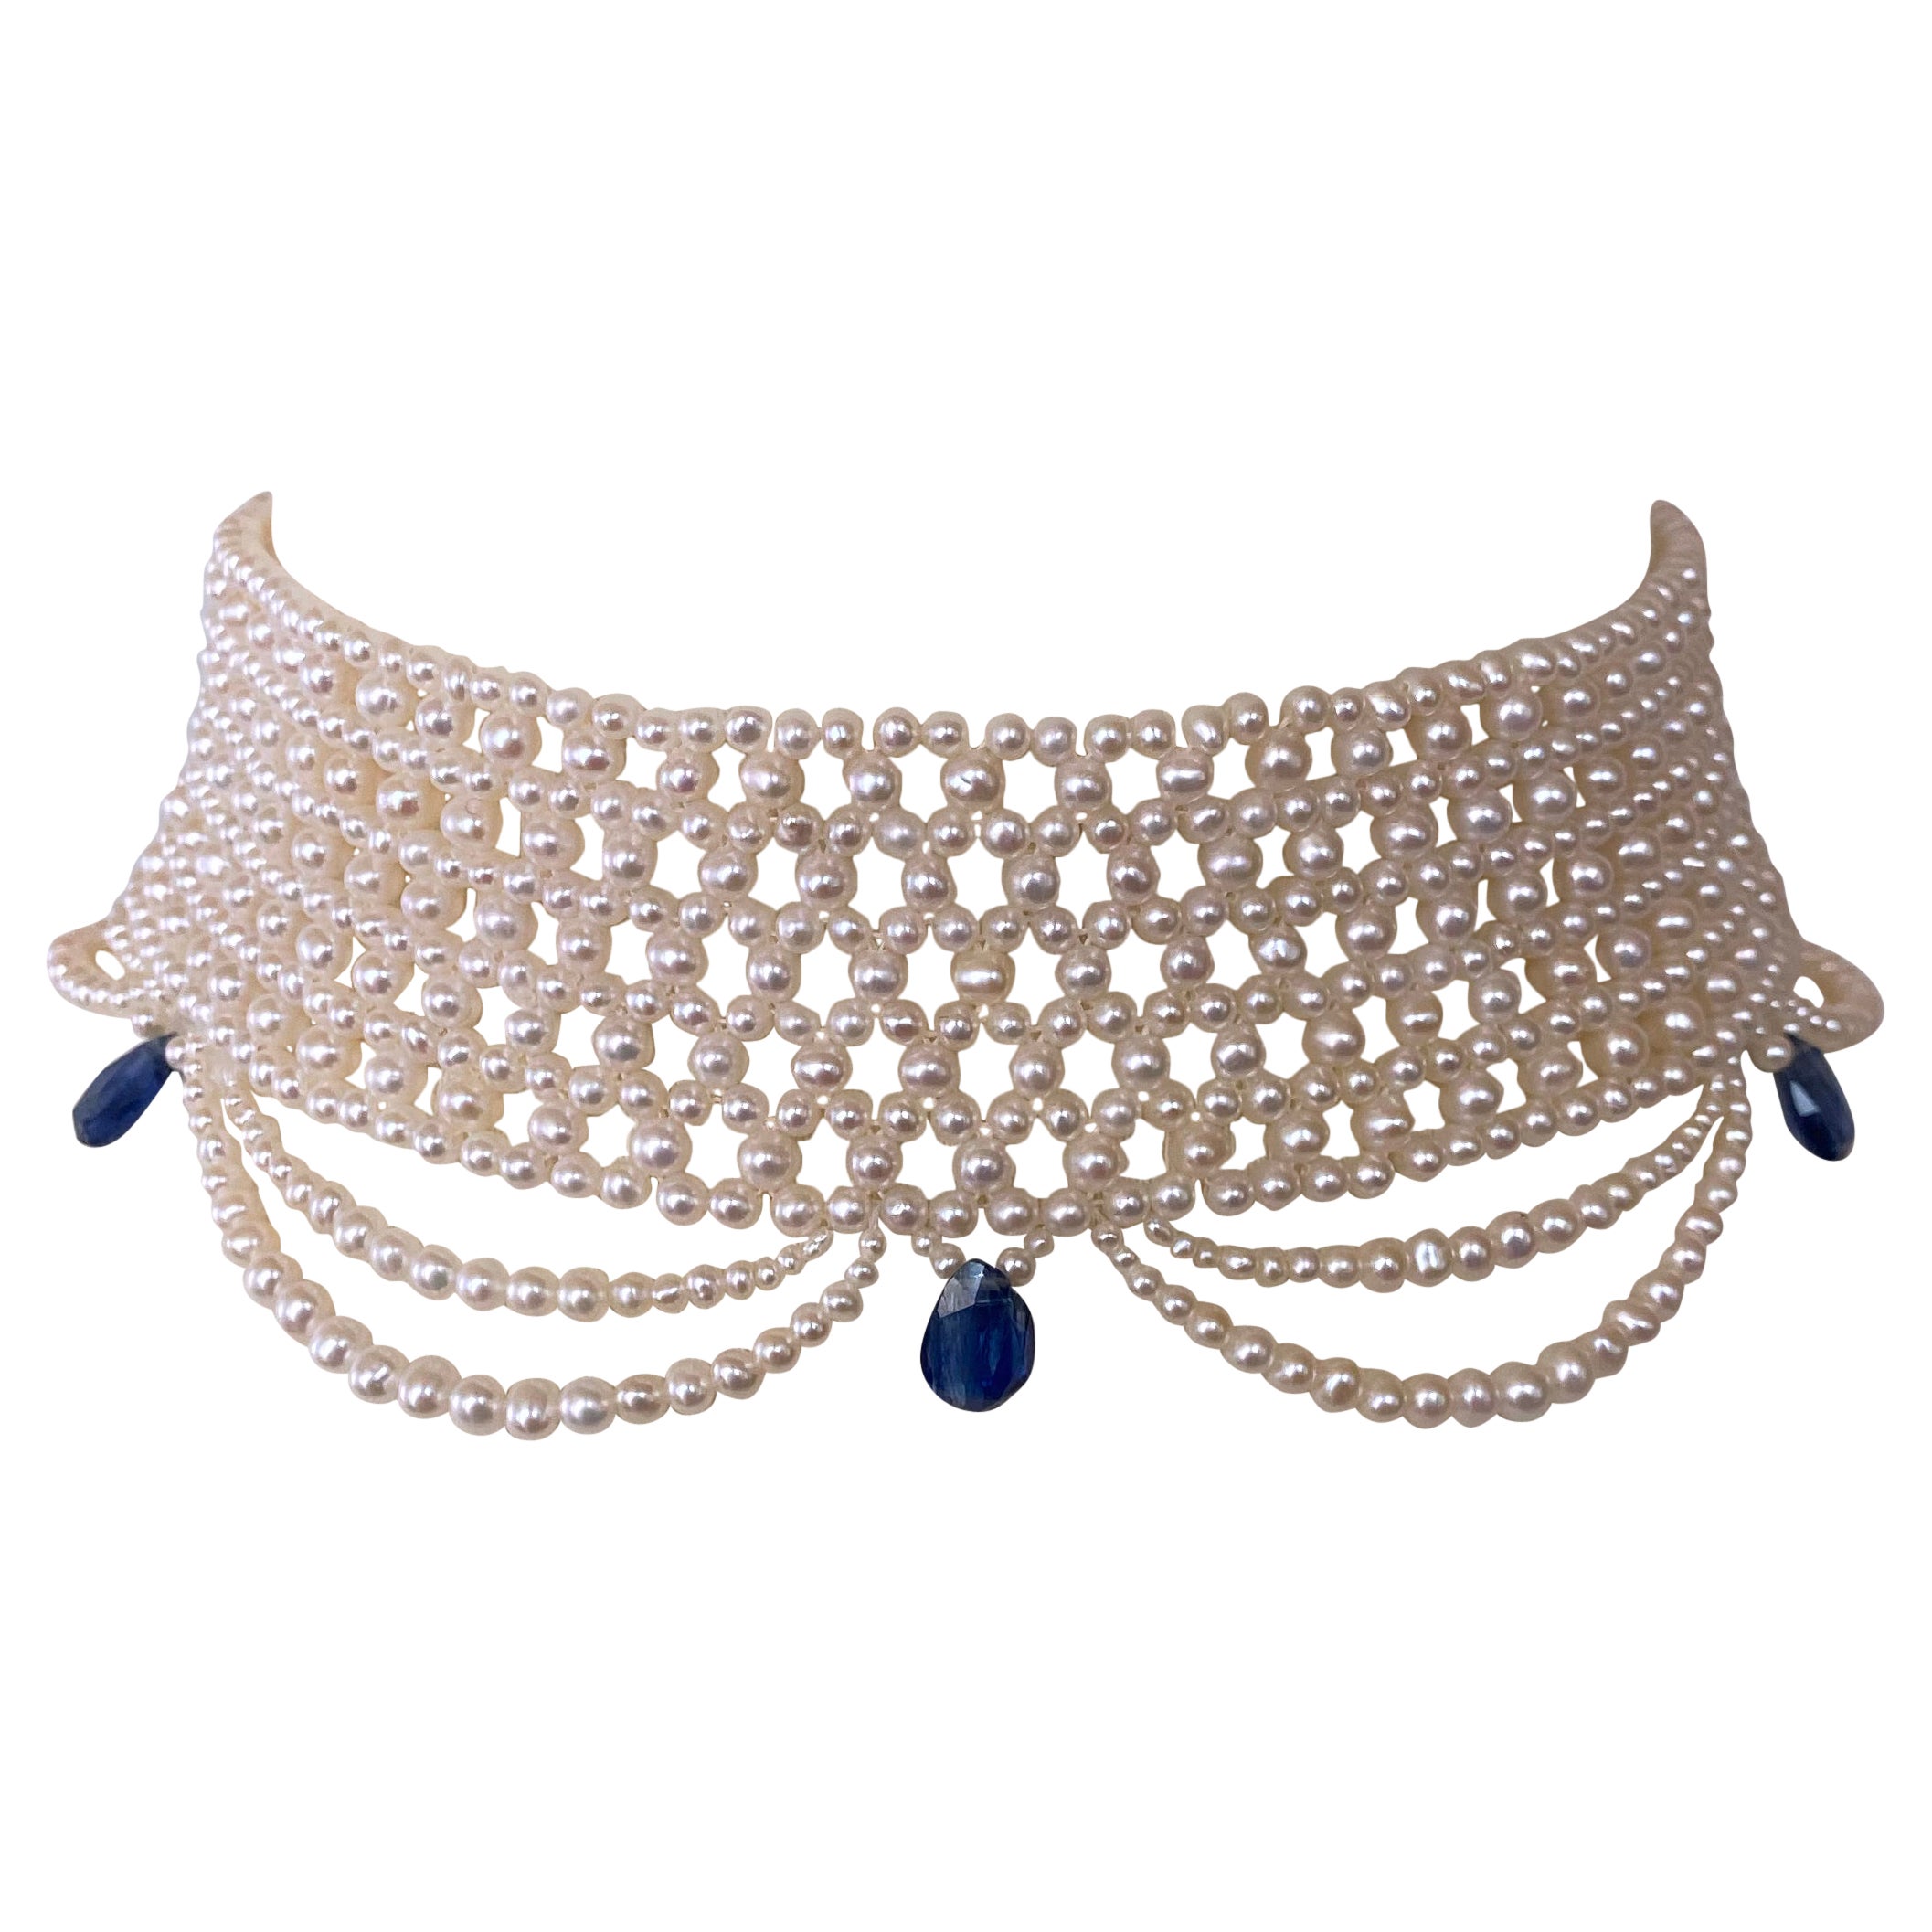 Marina J Woven Pearl Choker with Pearl Drapes and Kyanite Briolettes